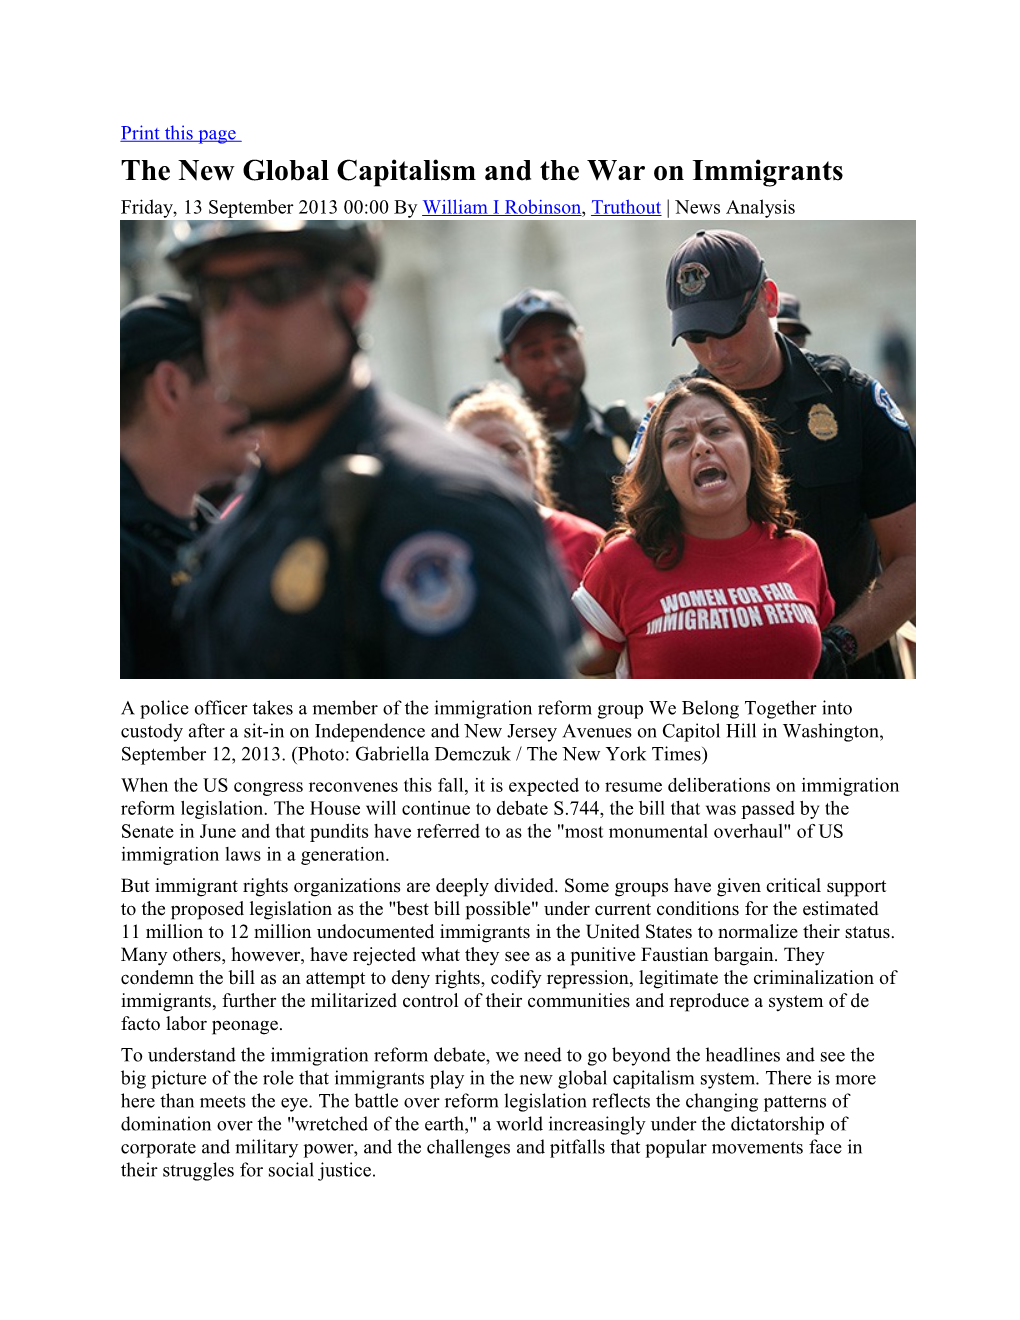 The New Global Capitalism and the War on Immigrants